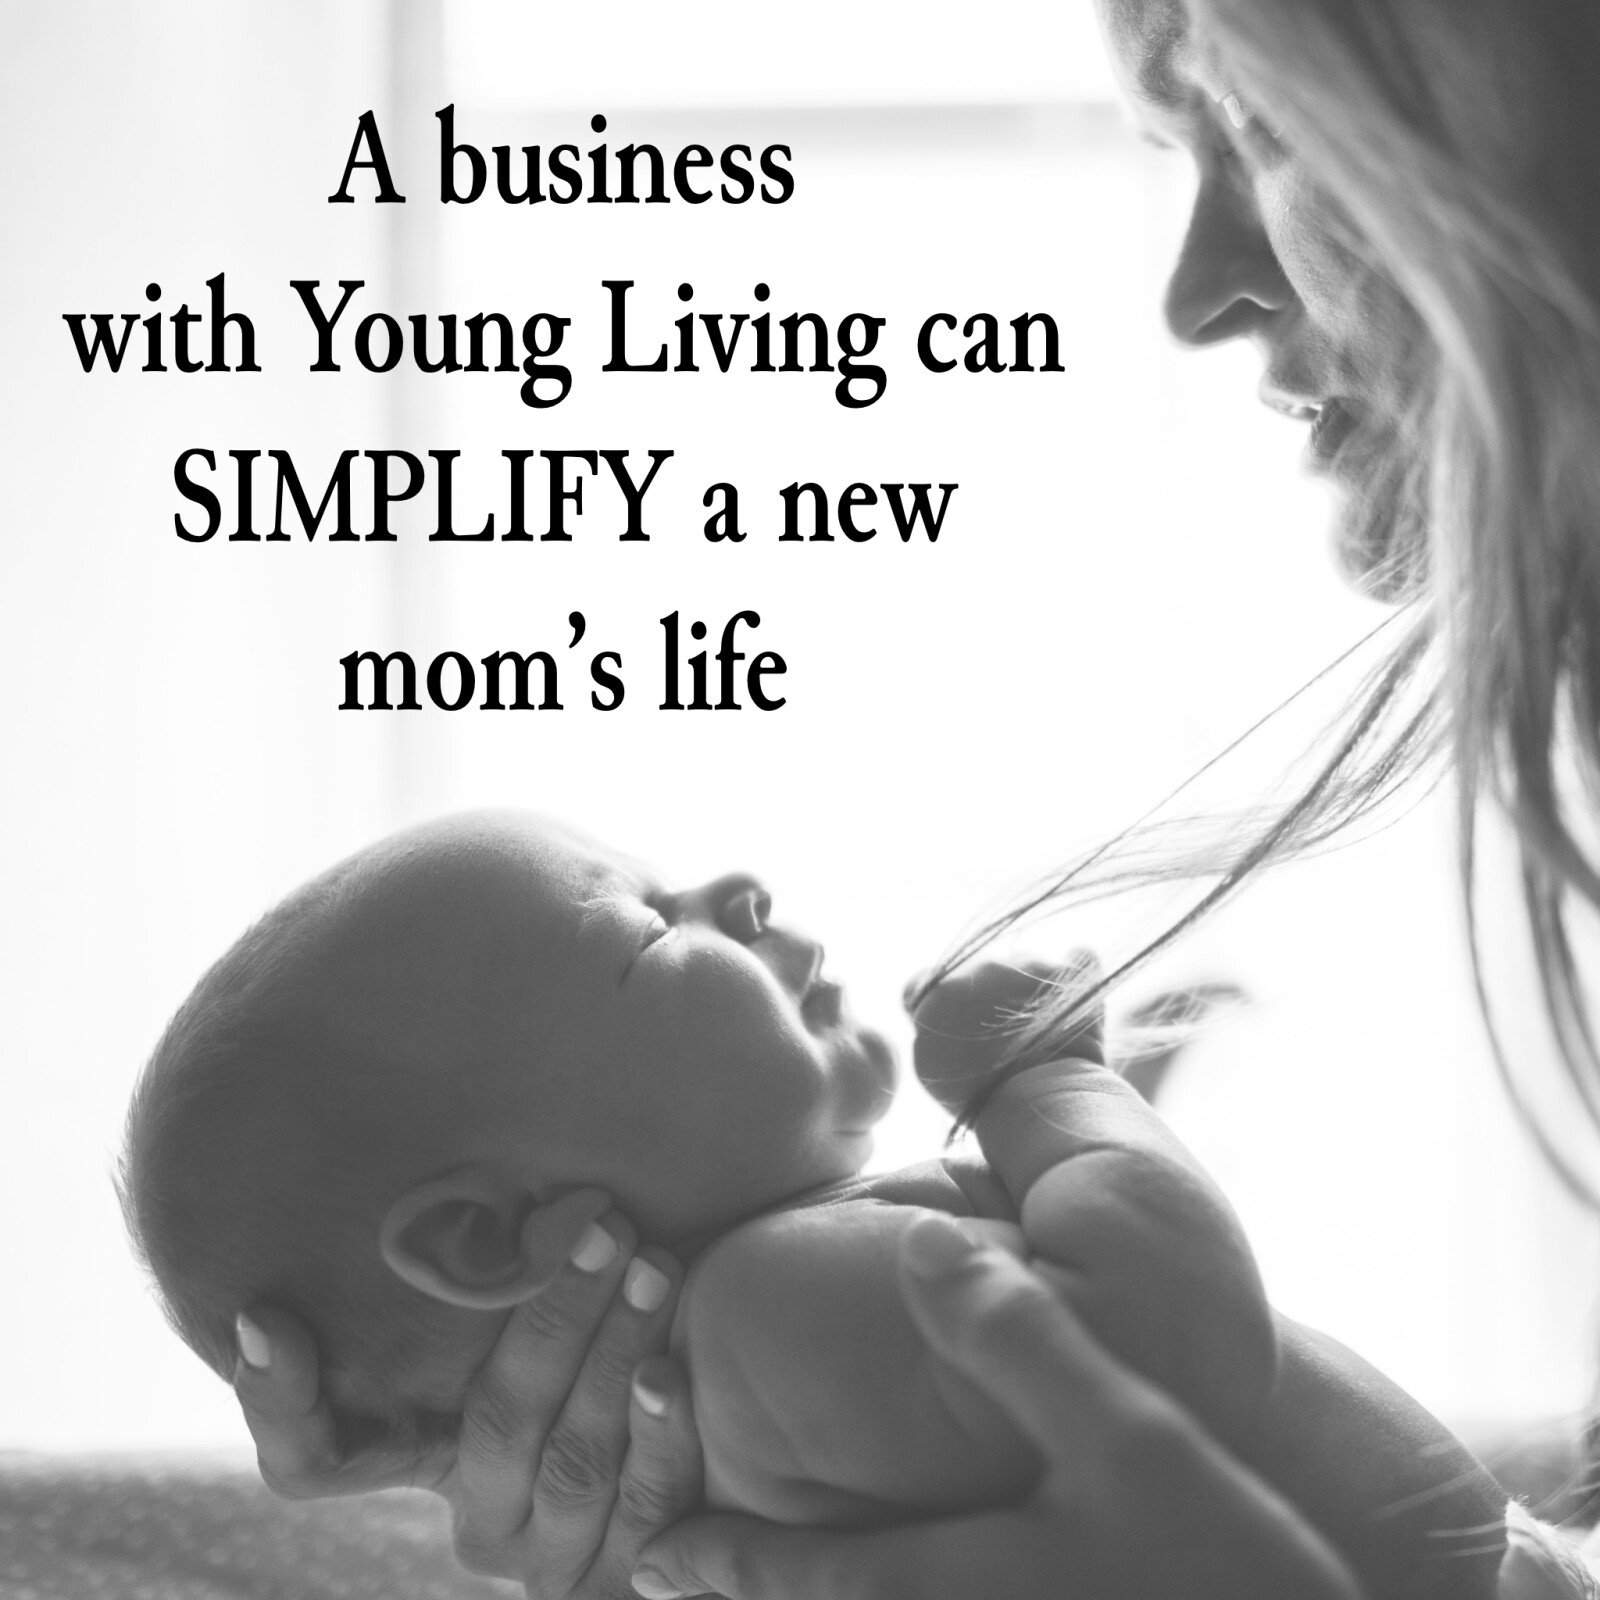 A business with Young Living can help SIMPLIFY a new mom’s life